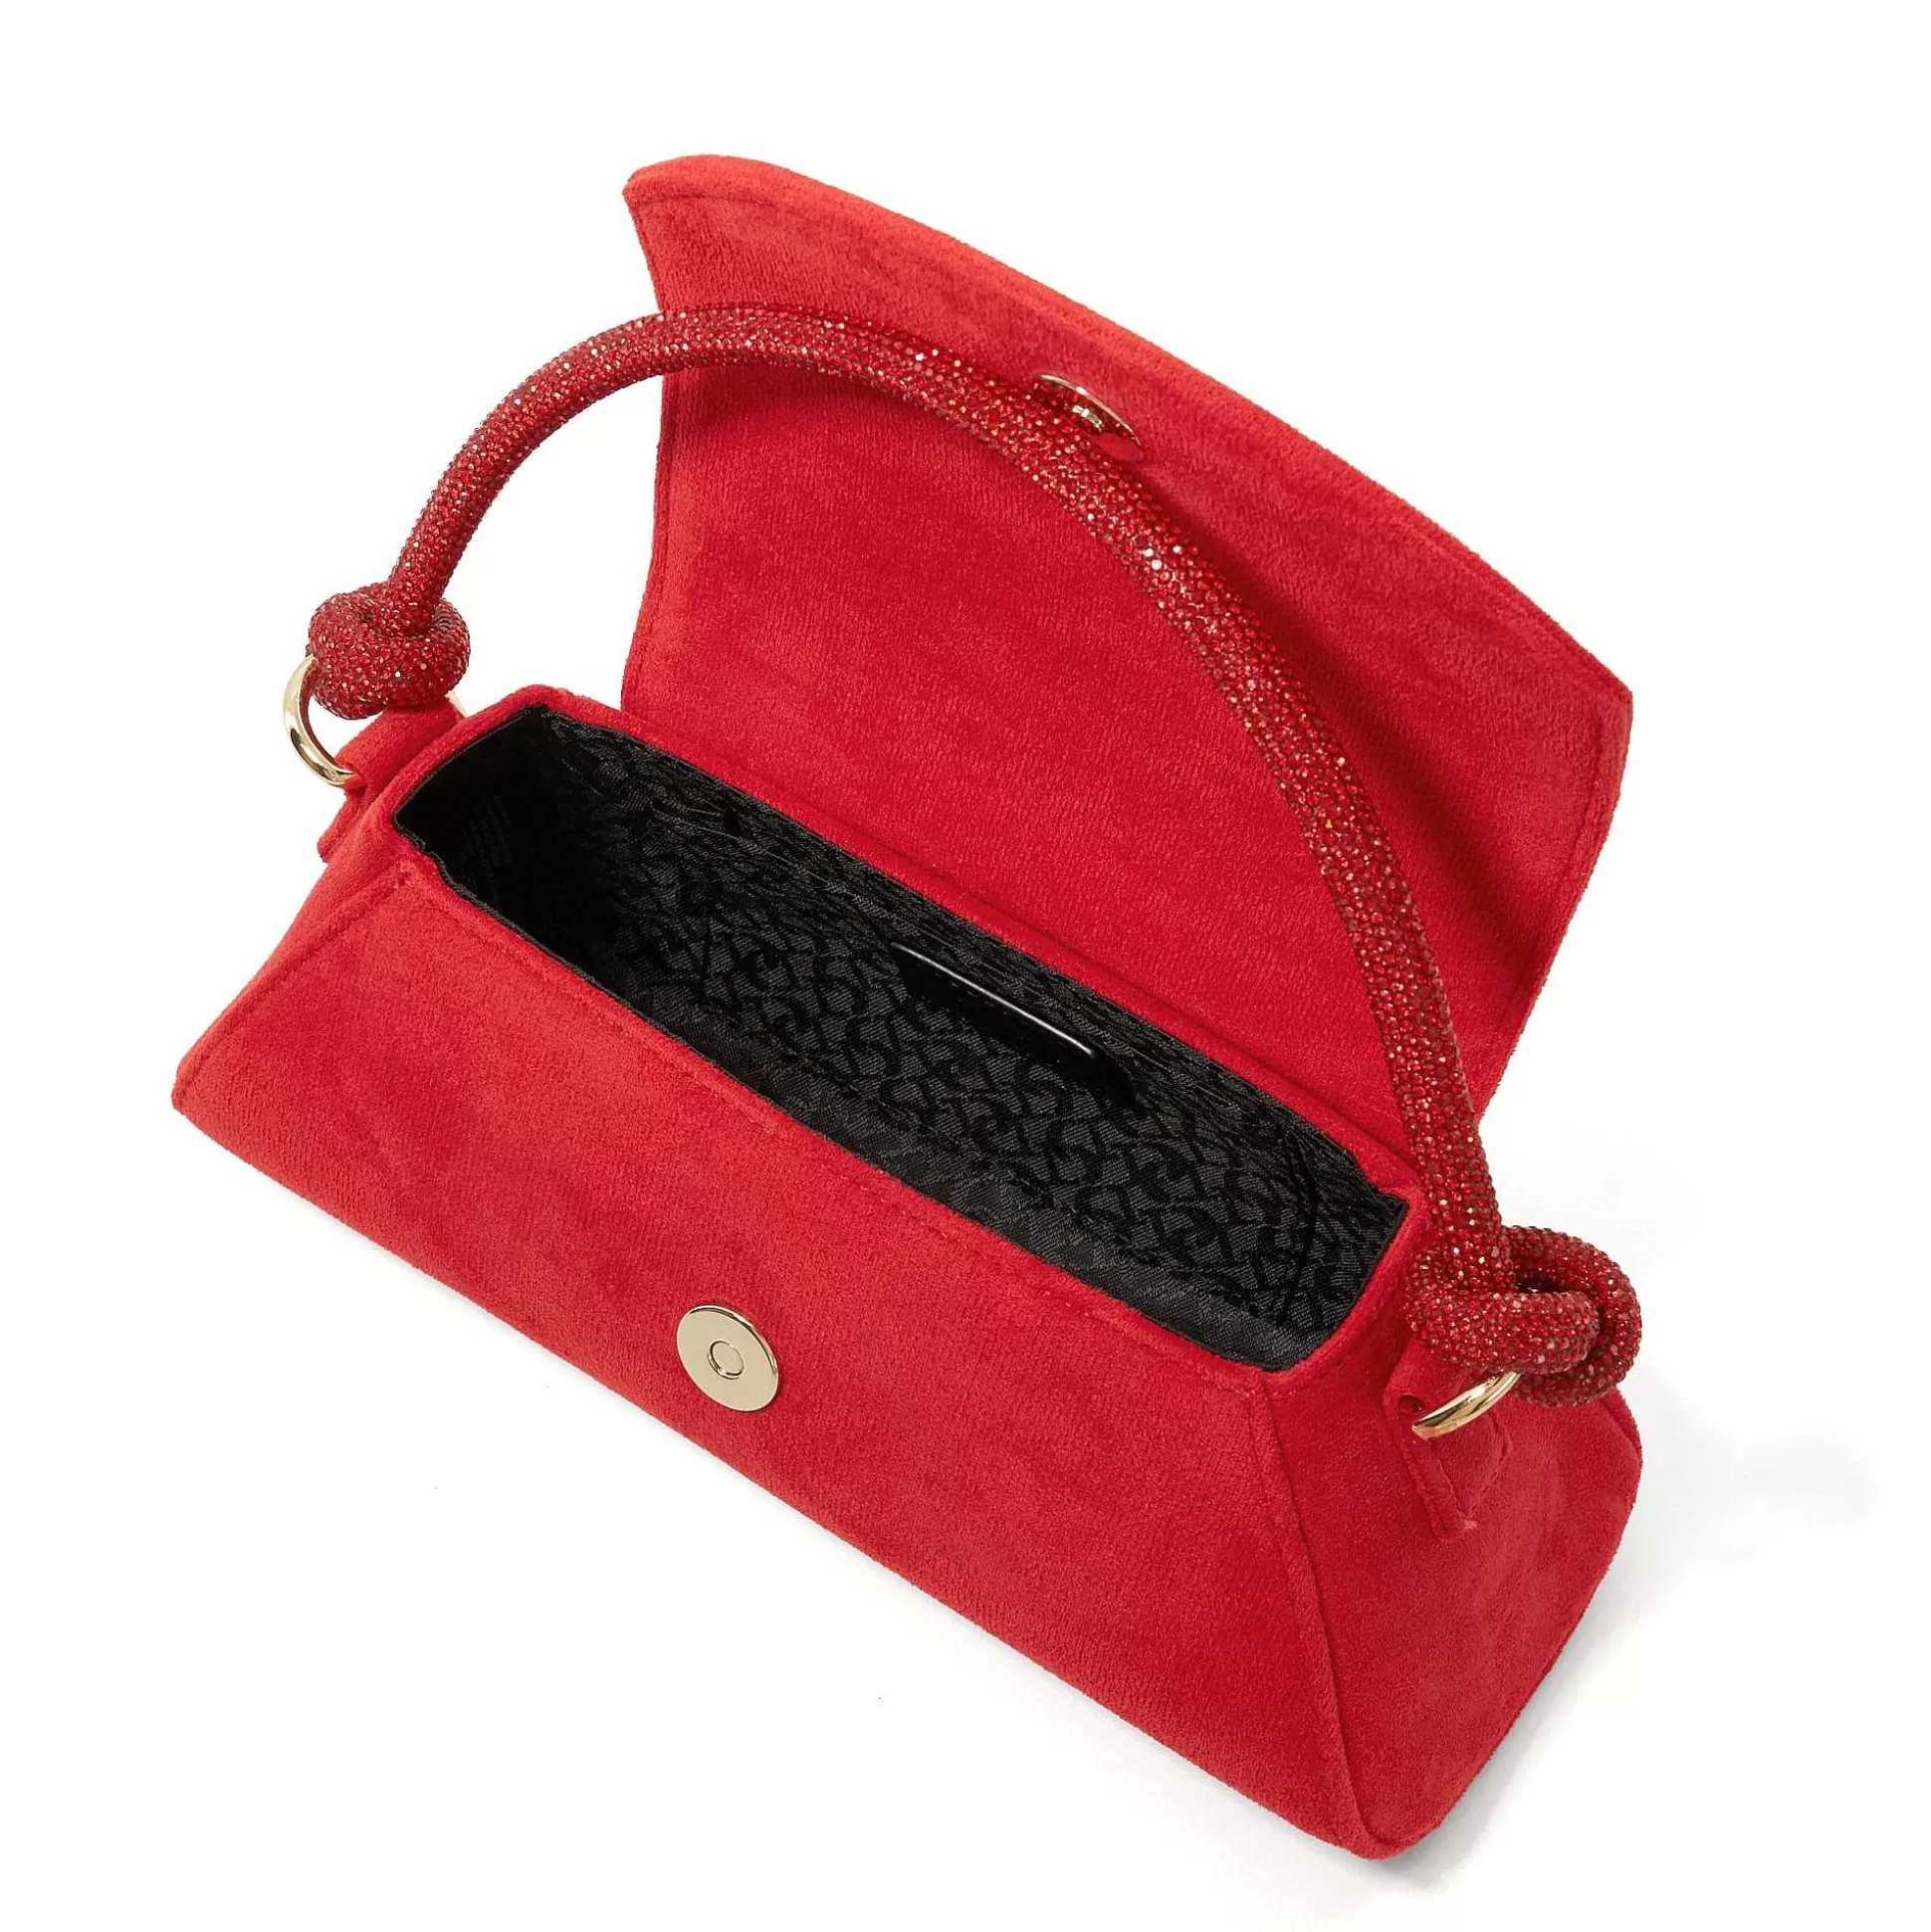 Dune London BRYNLEY - RED- Handbags | Gifts